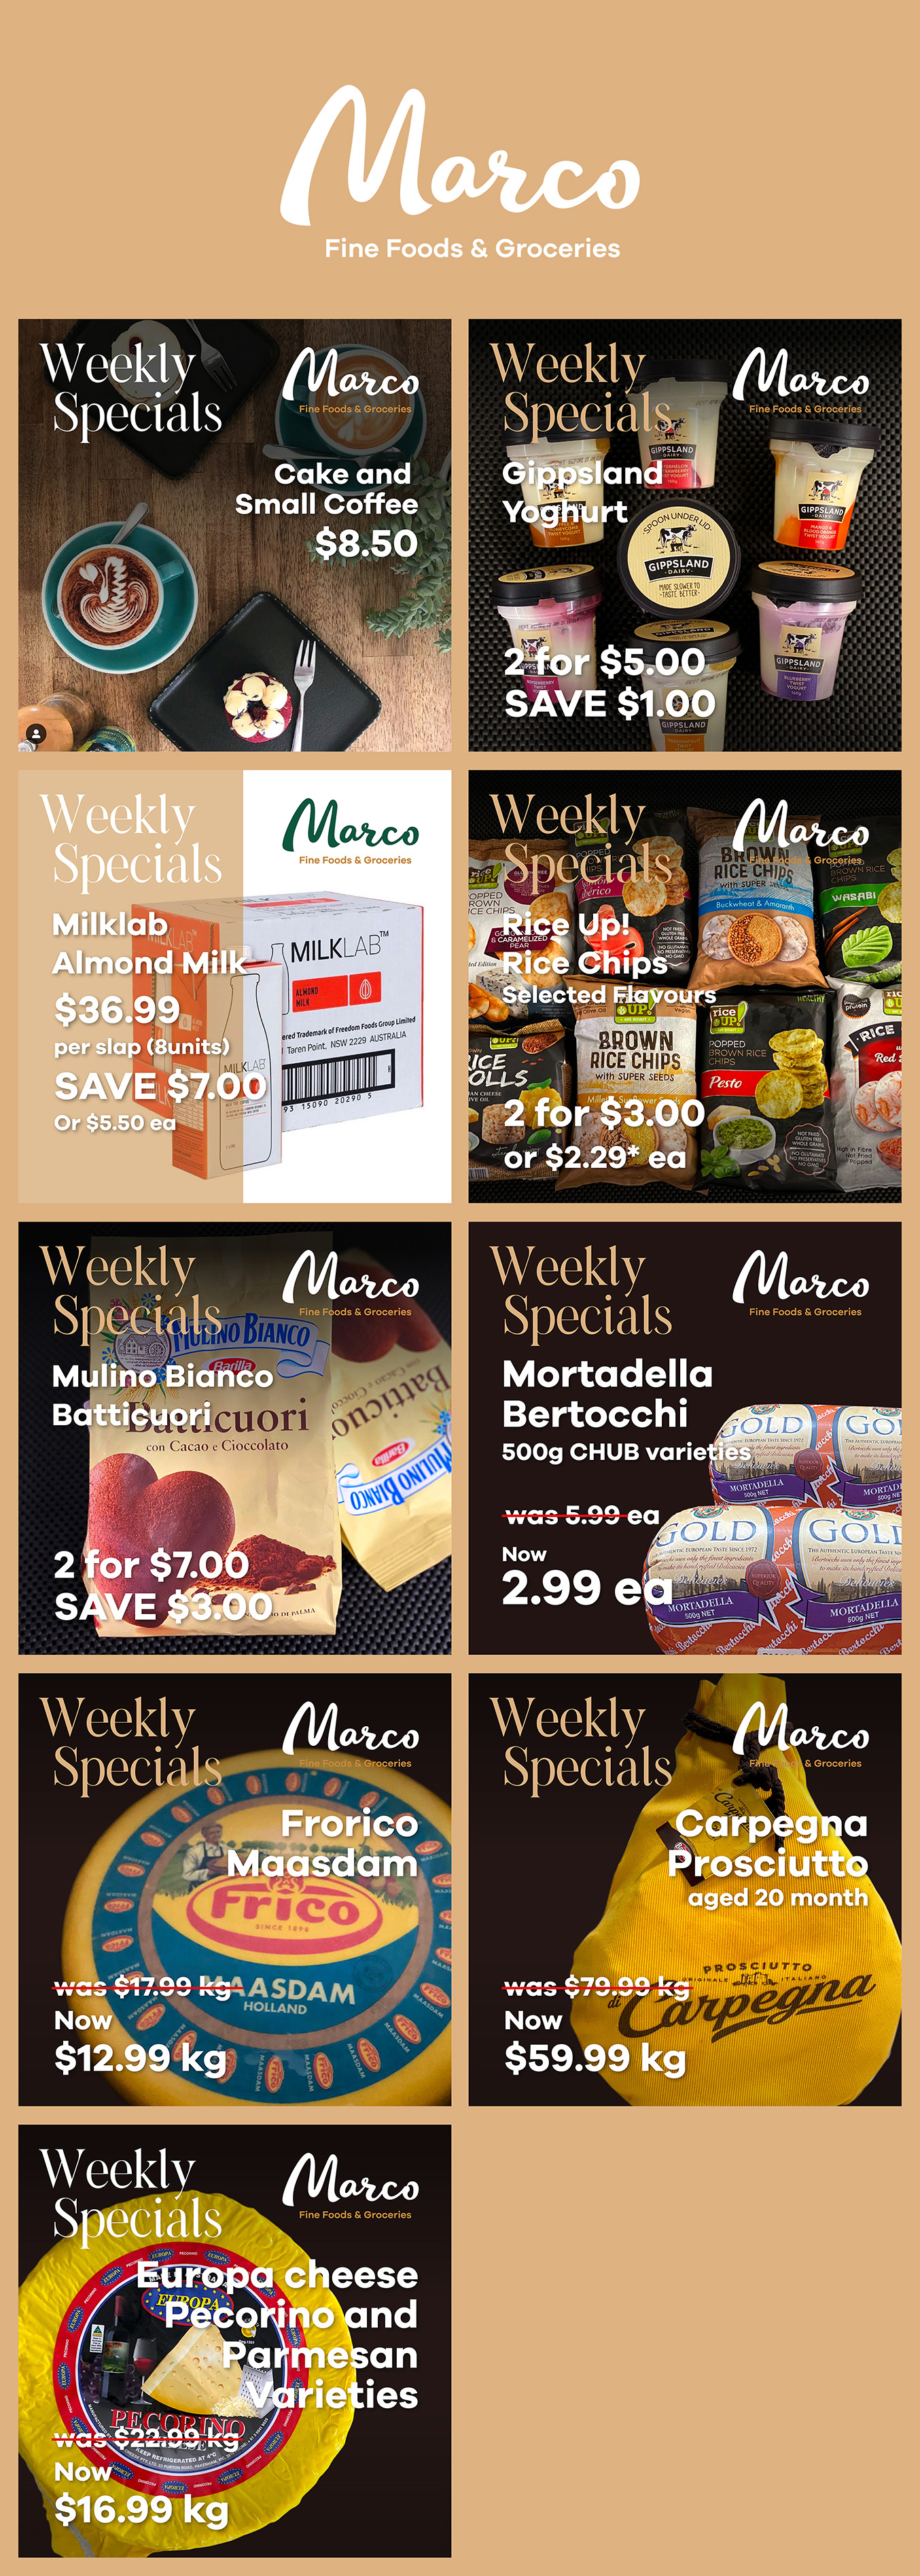 Marco FineFoods and Groceries